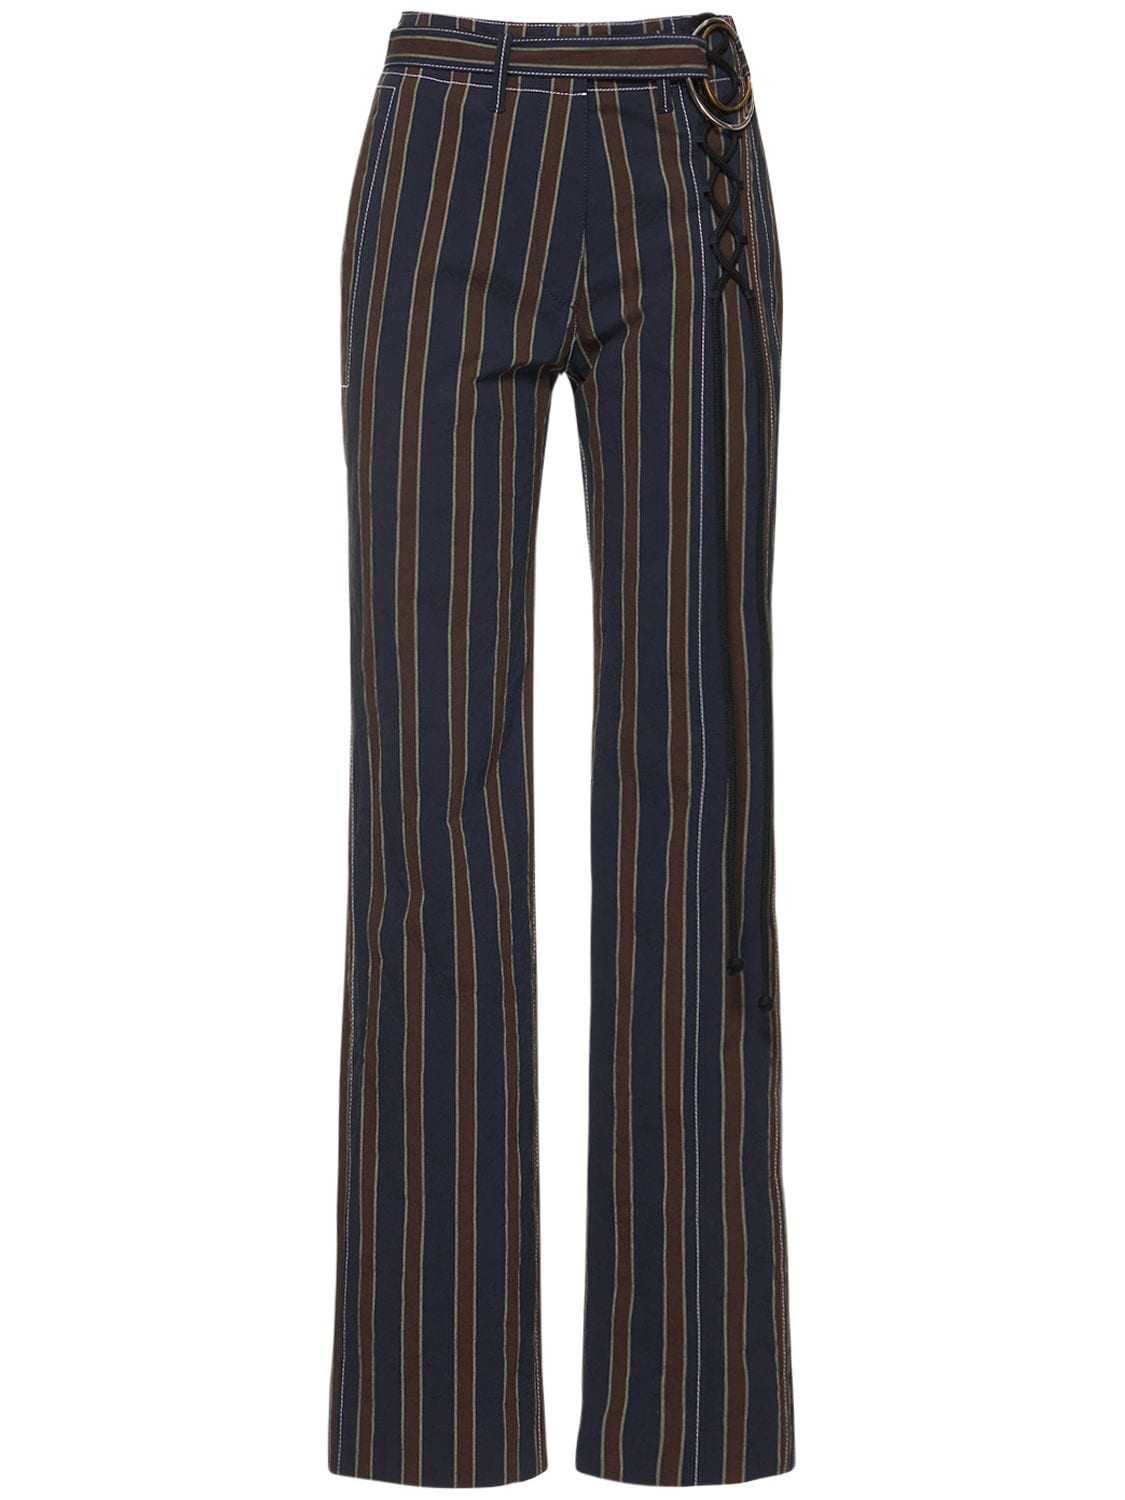 TORY BURCH STRIPED STRETCH COTTON RELAXED PANTS